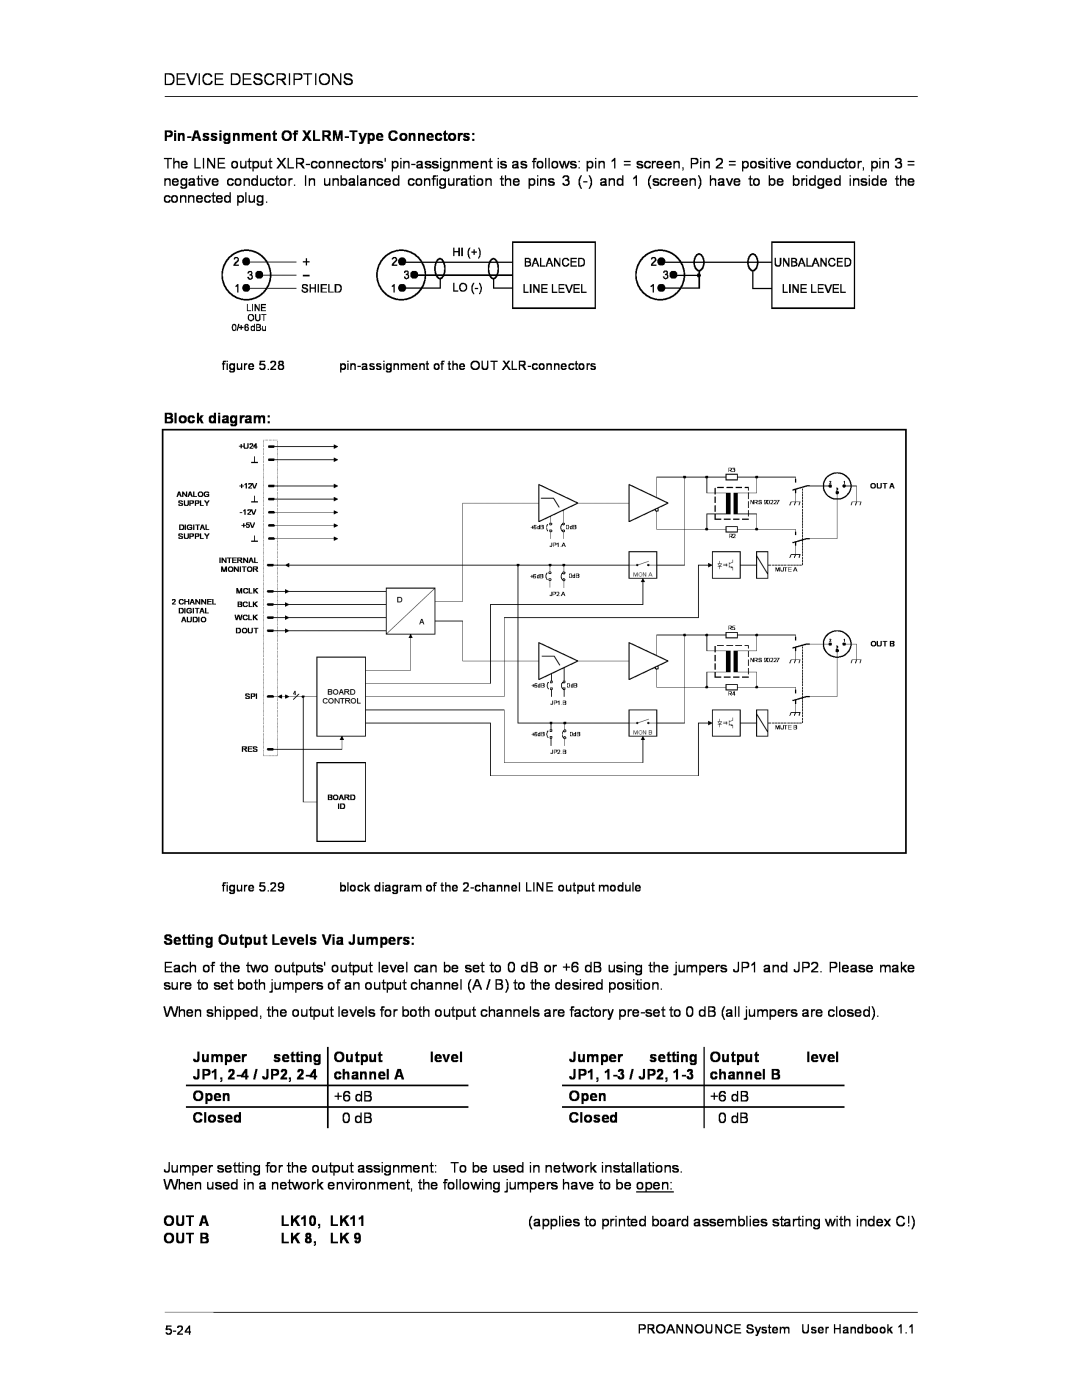 Dynacord DPM 4000 manual Pin-AssignmentOf XLRM-TypeConnectors 